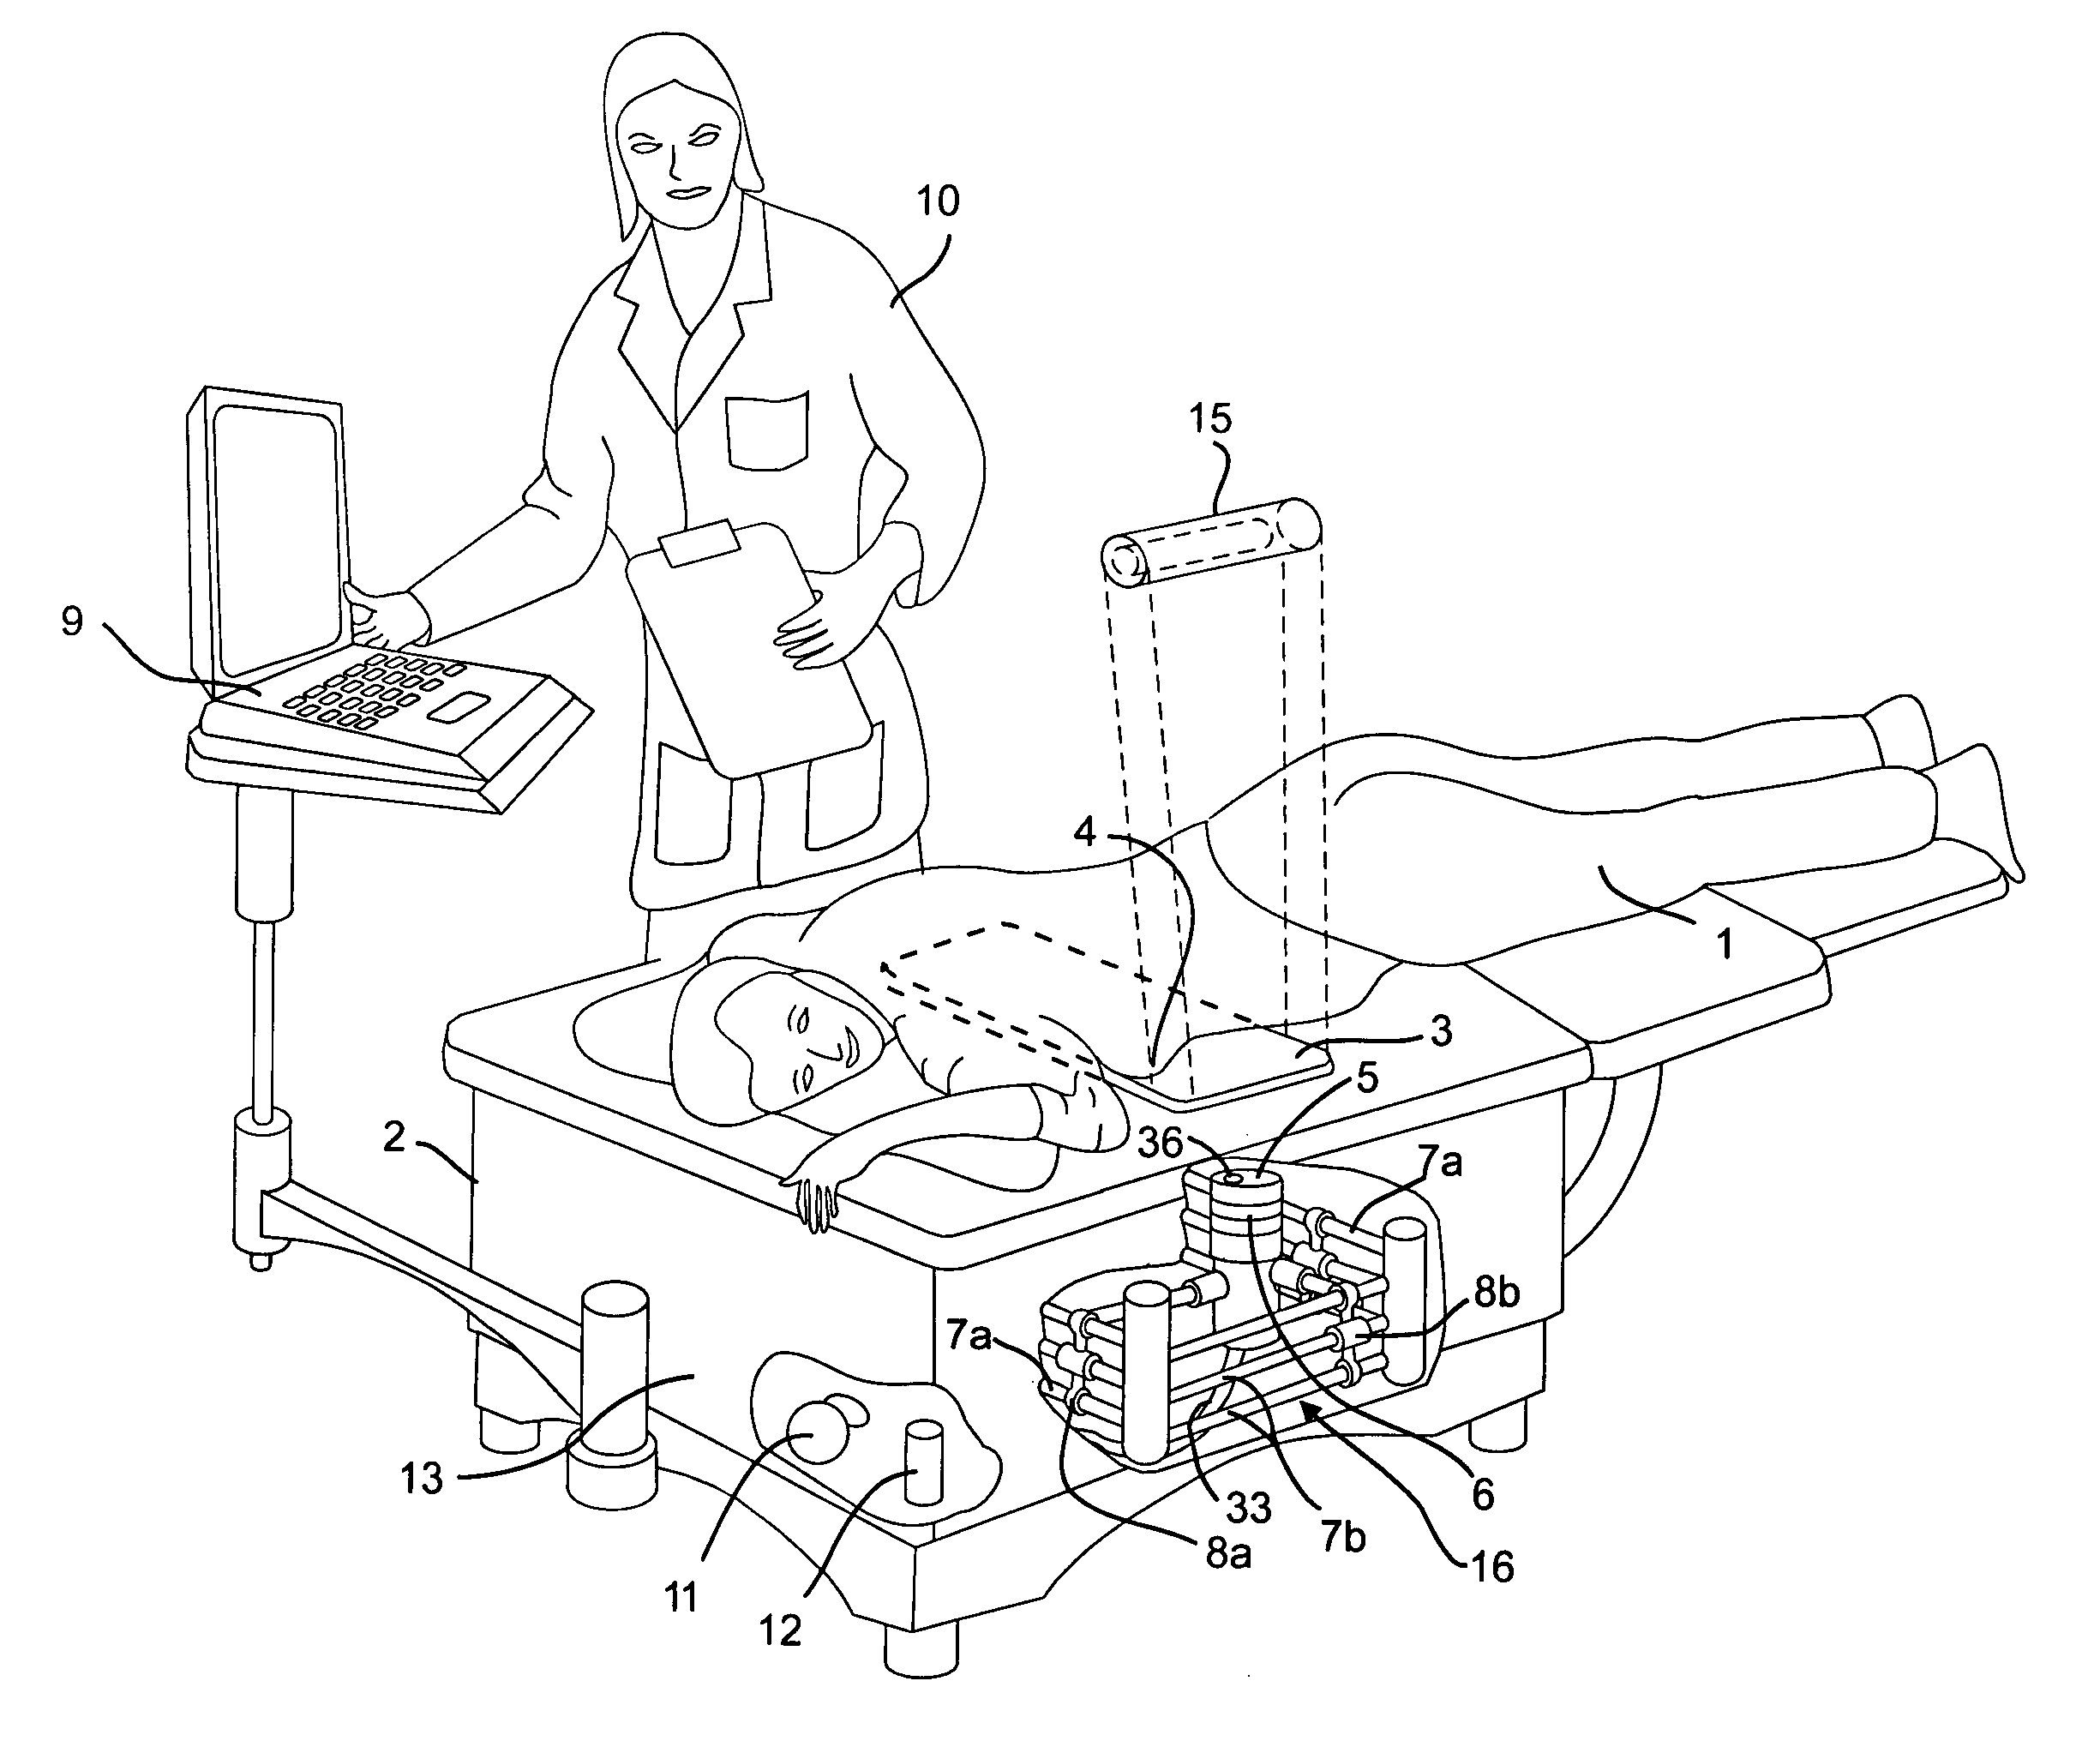 Apparatus and method for diagnosing breast cancer including examination table